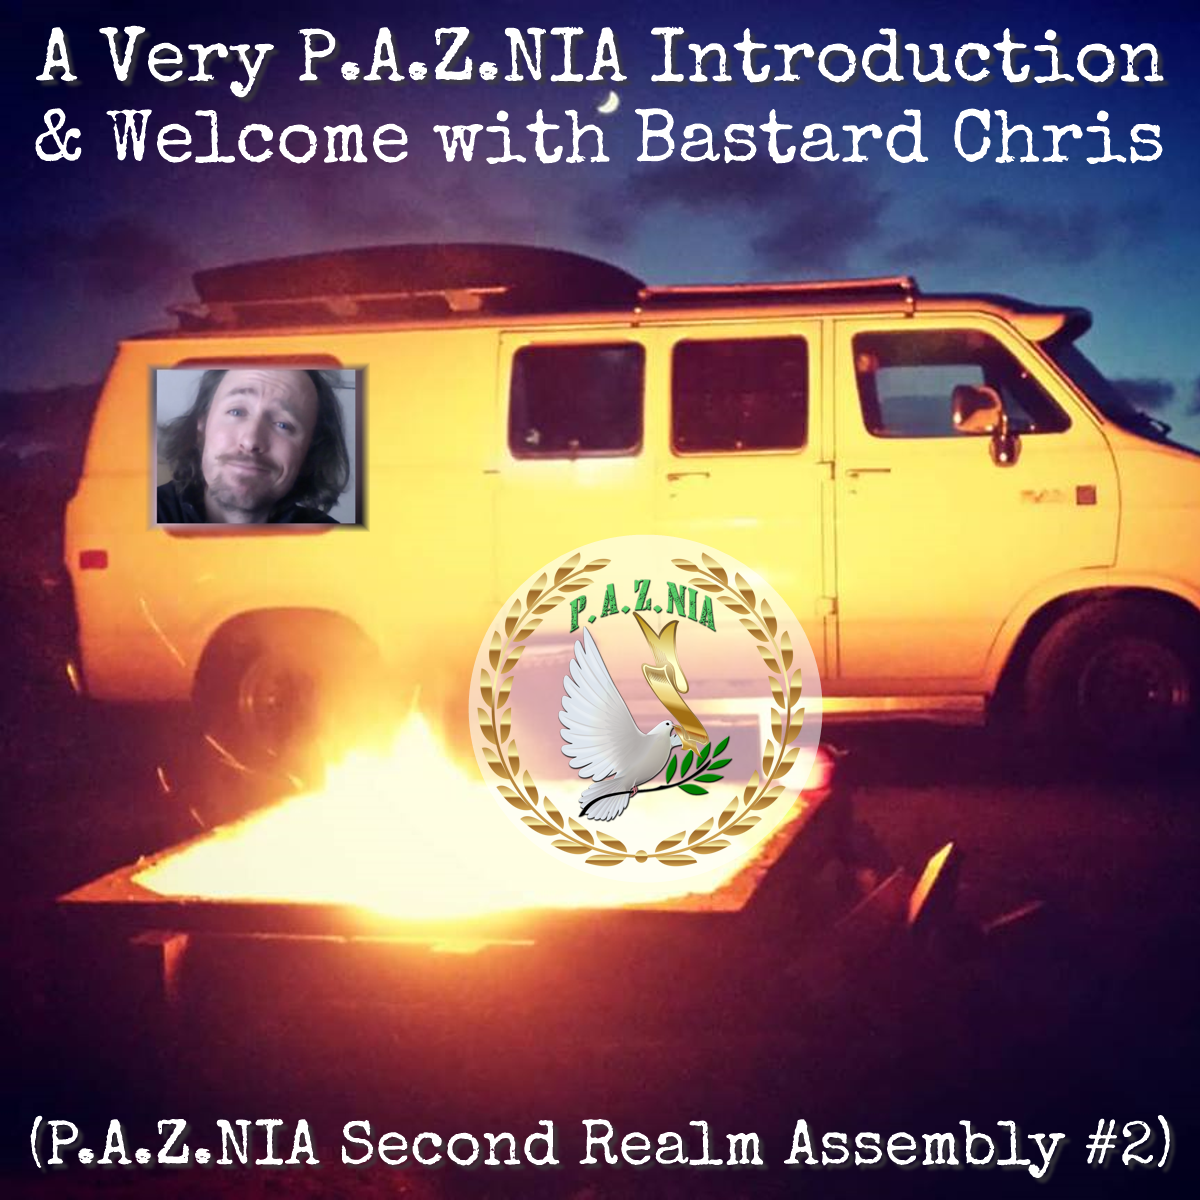 A Very P.A.Z.NIA Introduction & Welcome with Bastard Chris (P.A.Z.NIA Second Realm Assembly #2)